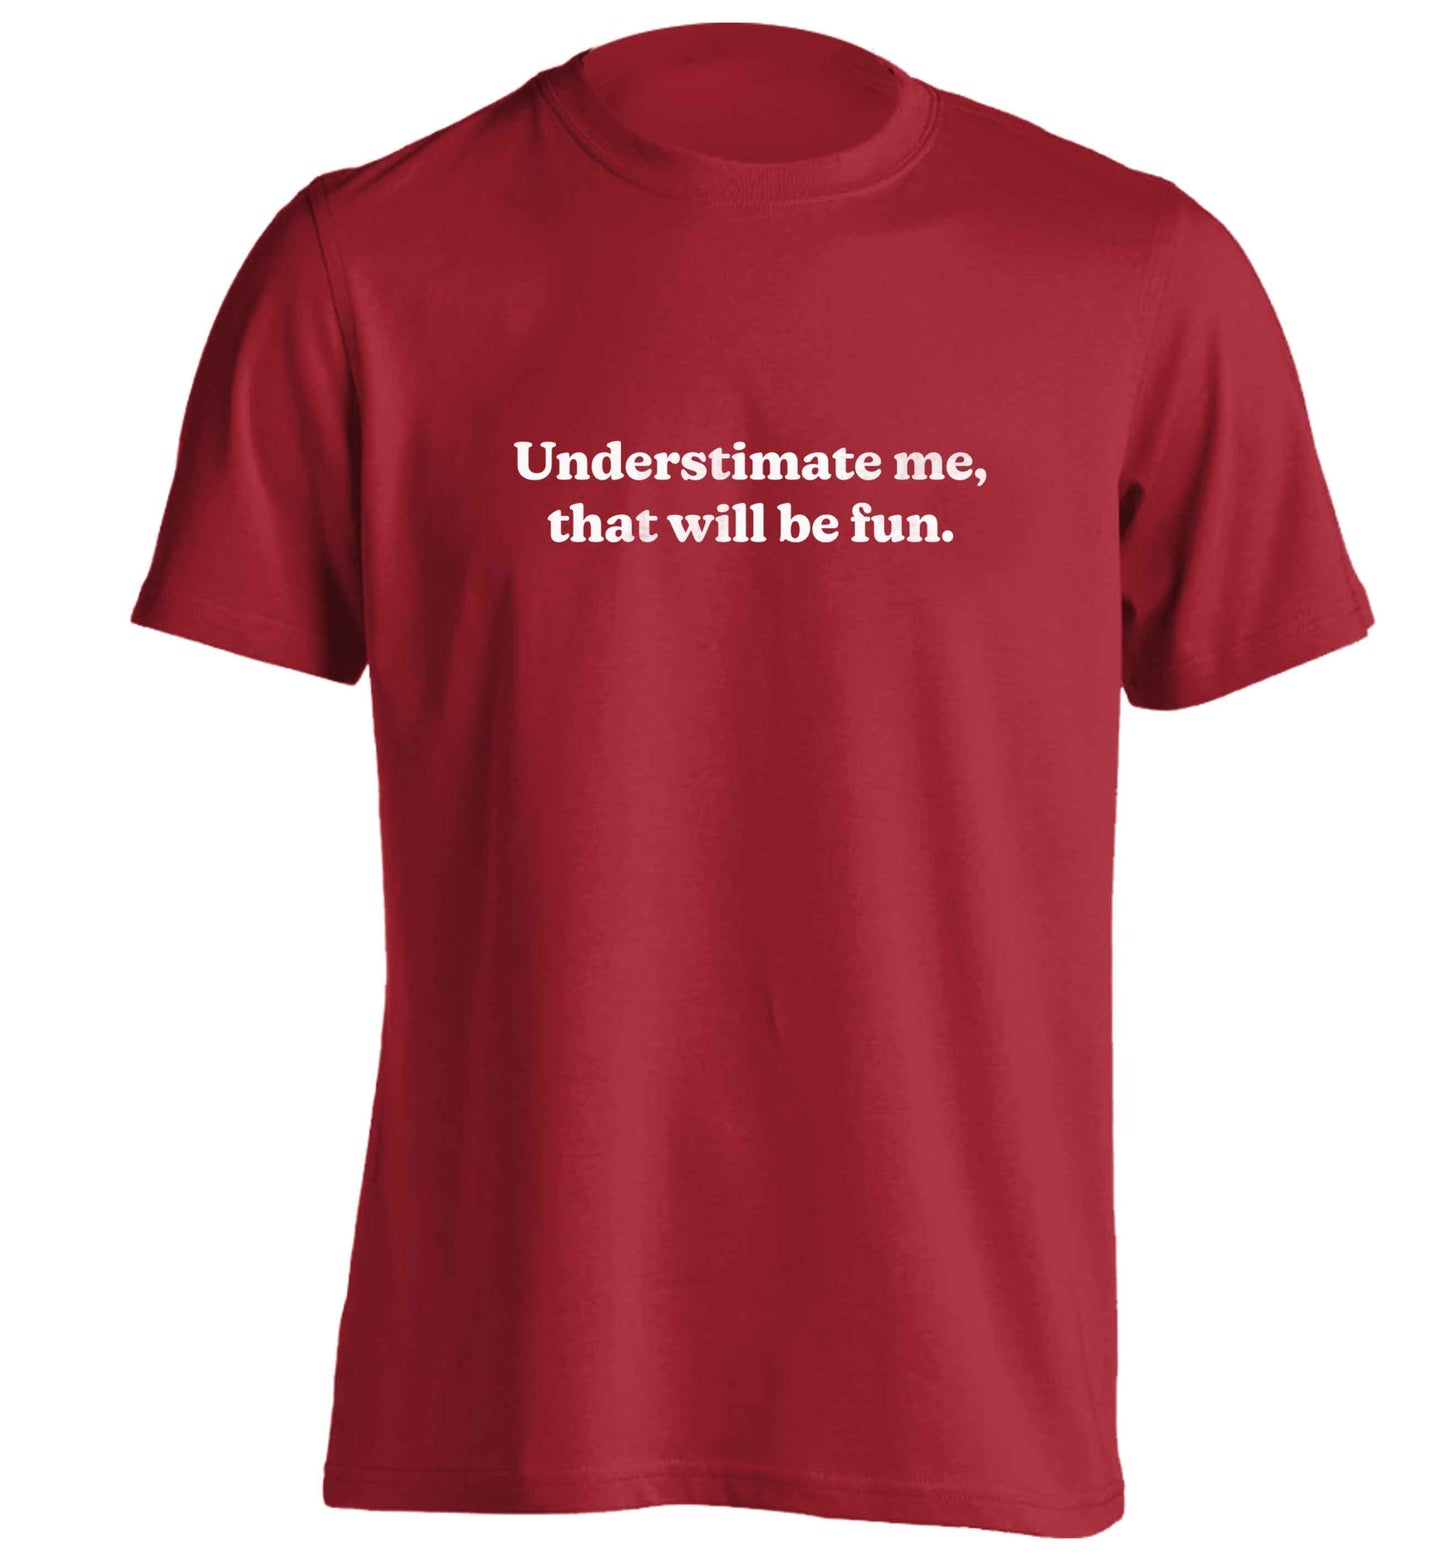 Underestimate me that will be fun adults unisex red Tshirt 2XL